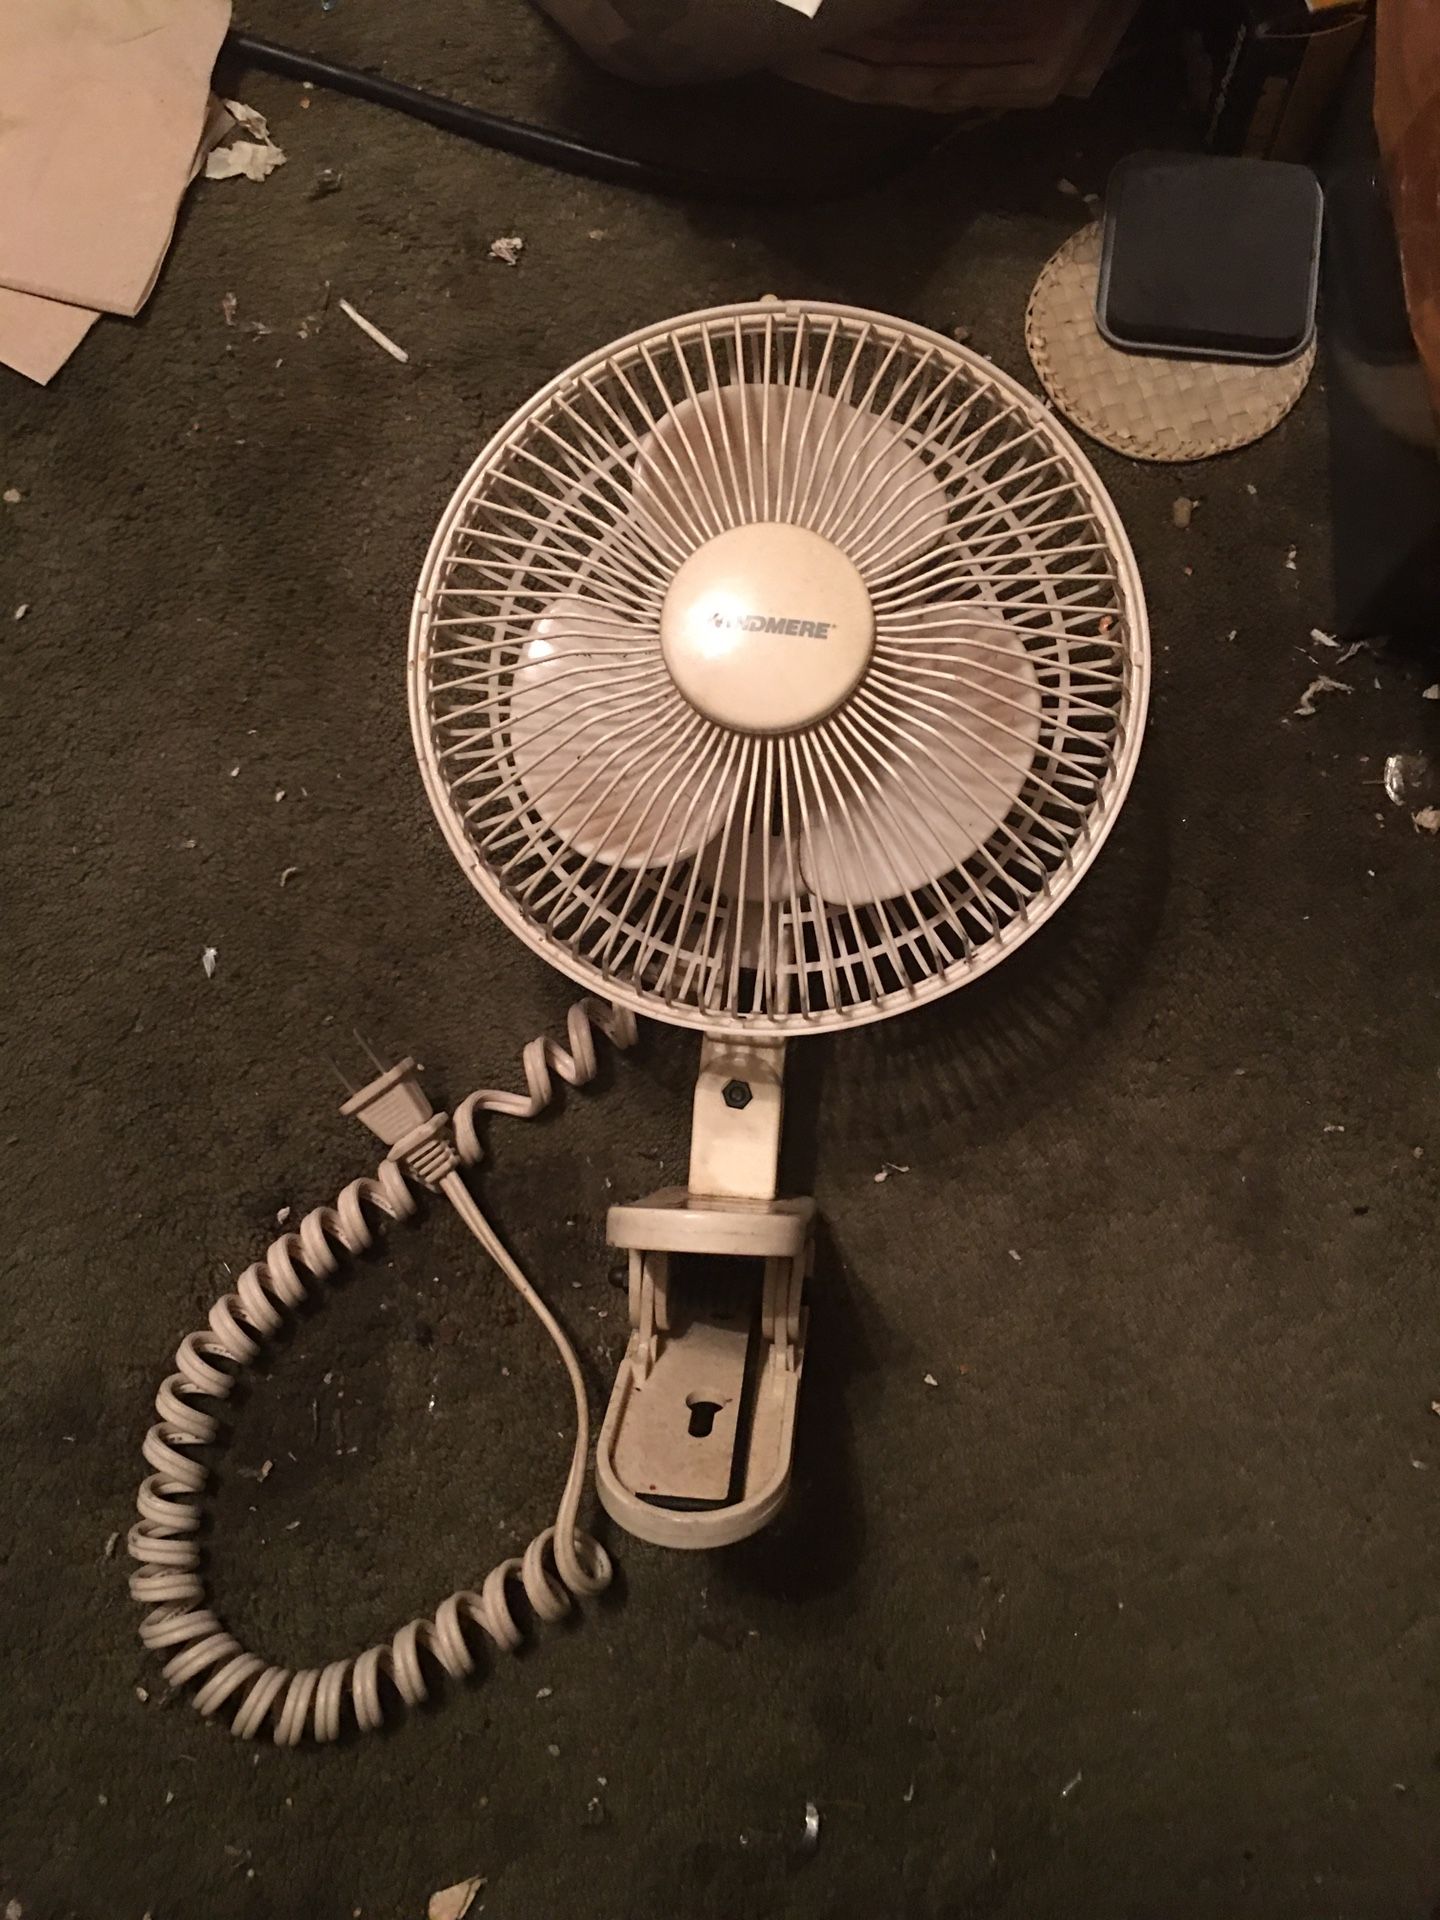 A WINDMERE 6” INCH CLAMP ON ELECTRIC FAN 2-SPEED LIKE NEW $20.00